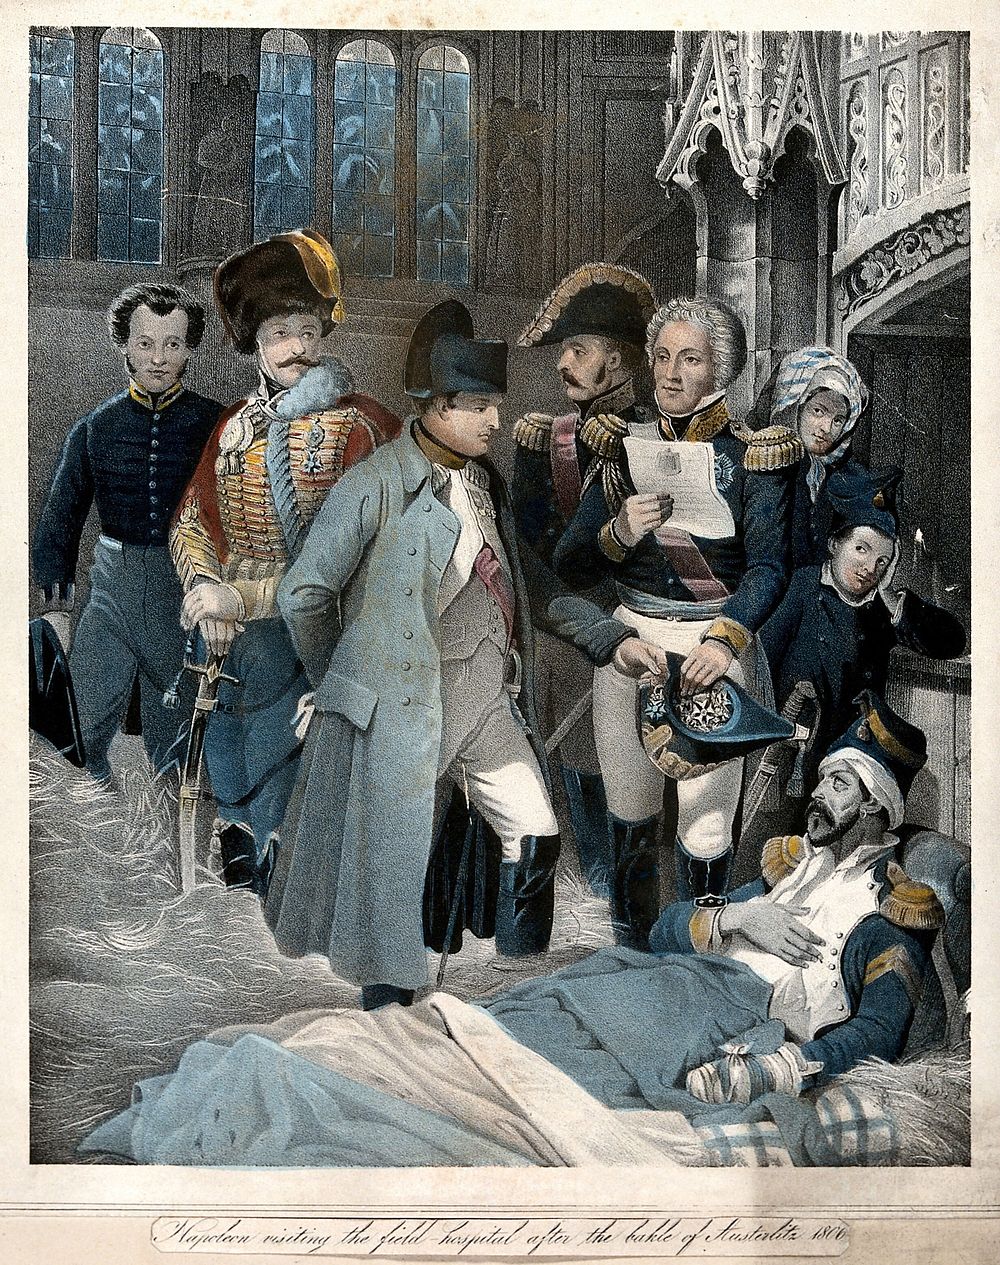 Battle of Austerlitz: Napoleon visiting wounded soldiers in a church used as a field hospital after the battle. Coloured…